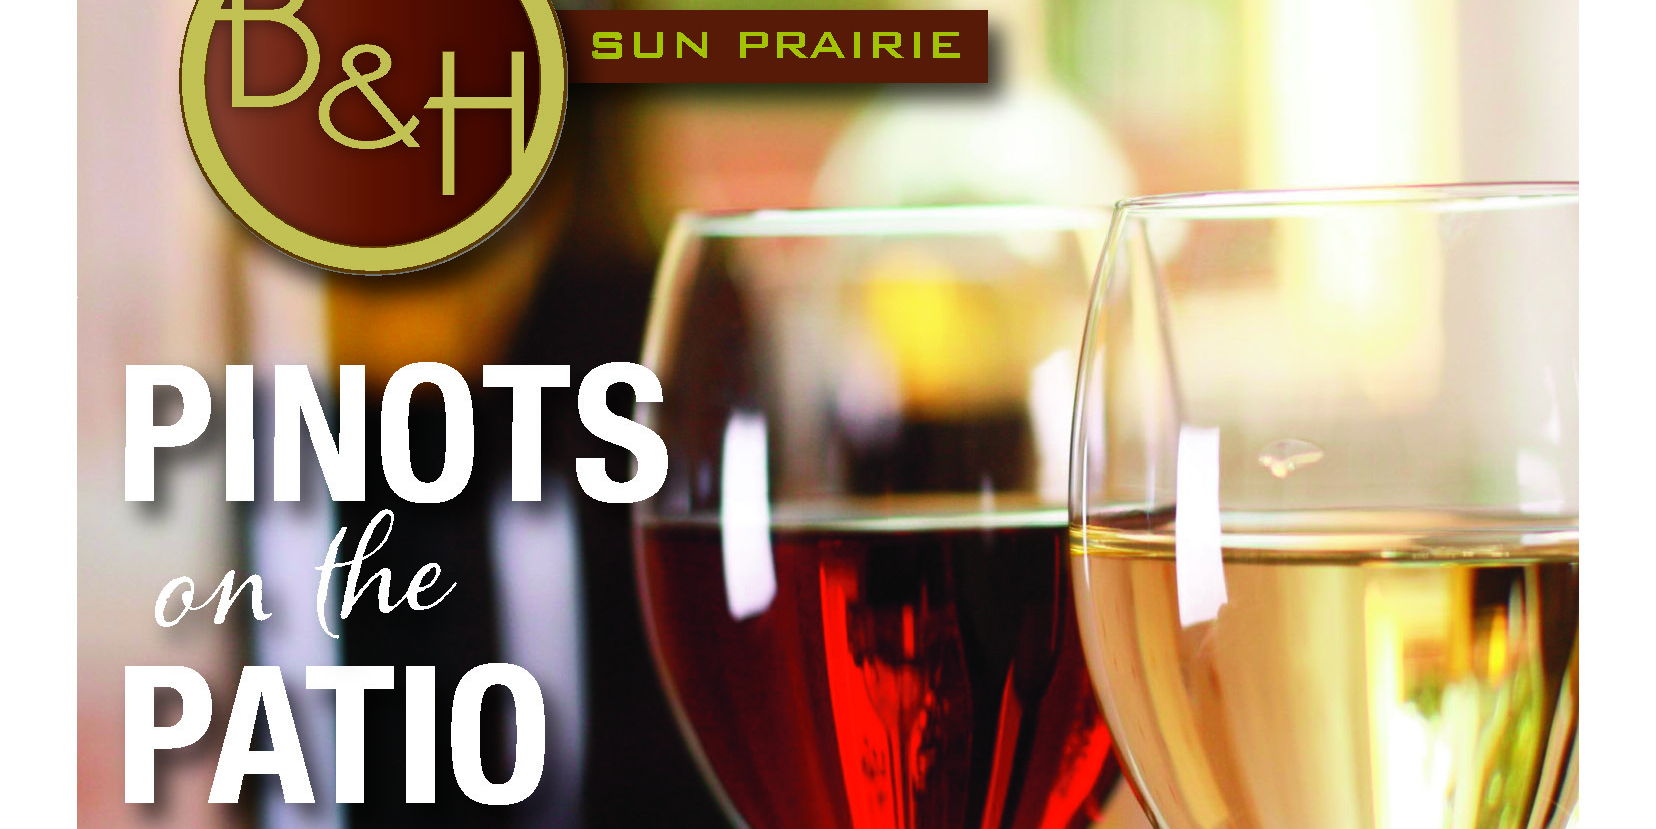 Pinots on the Patio promotional image